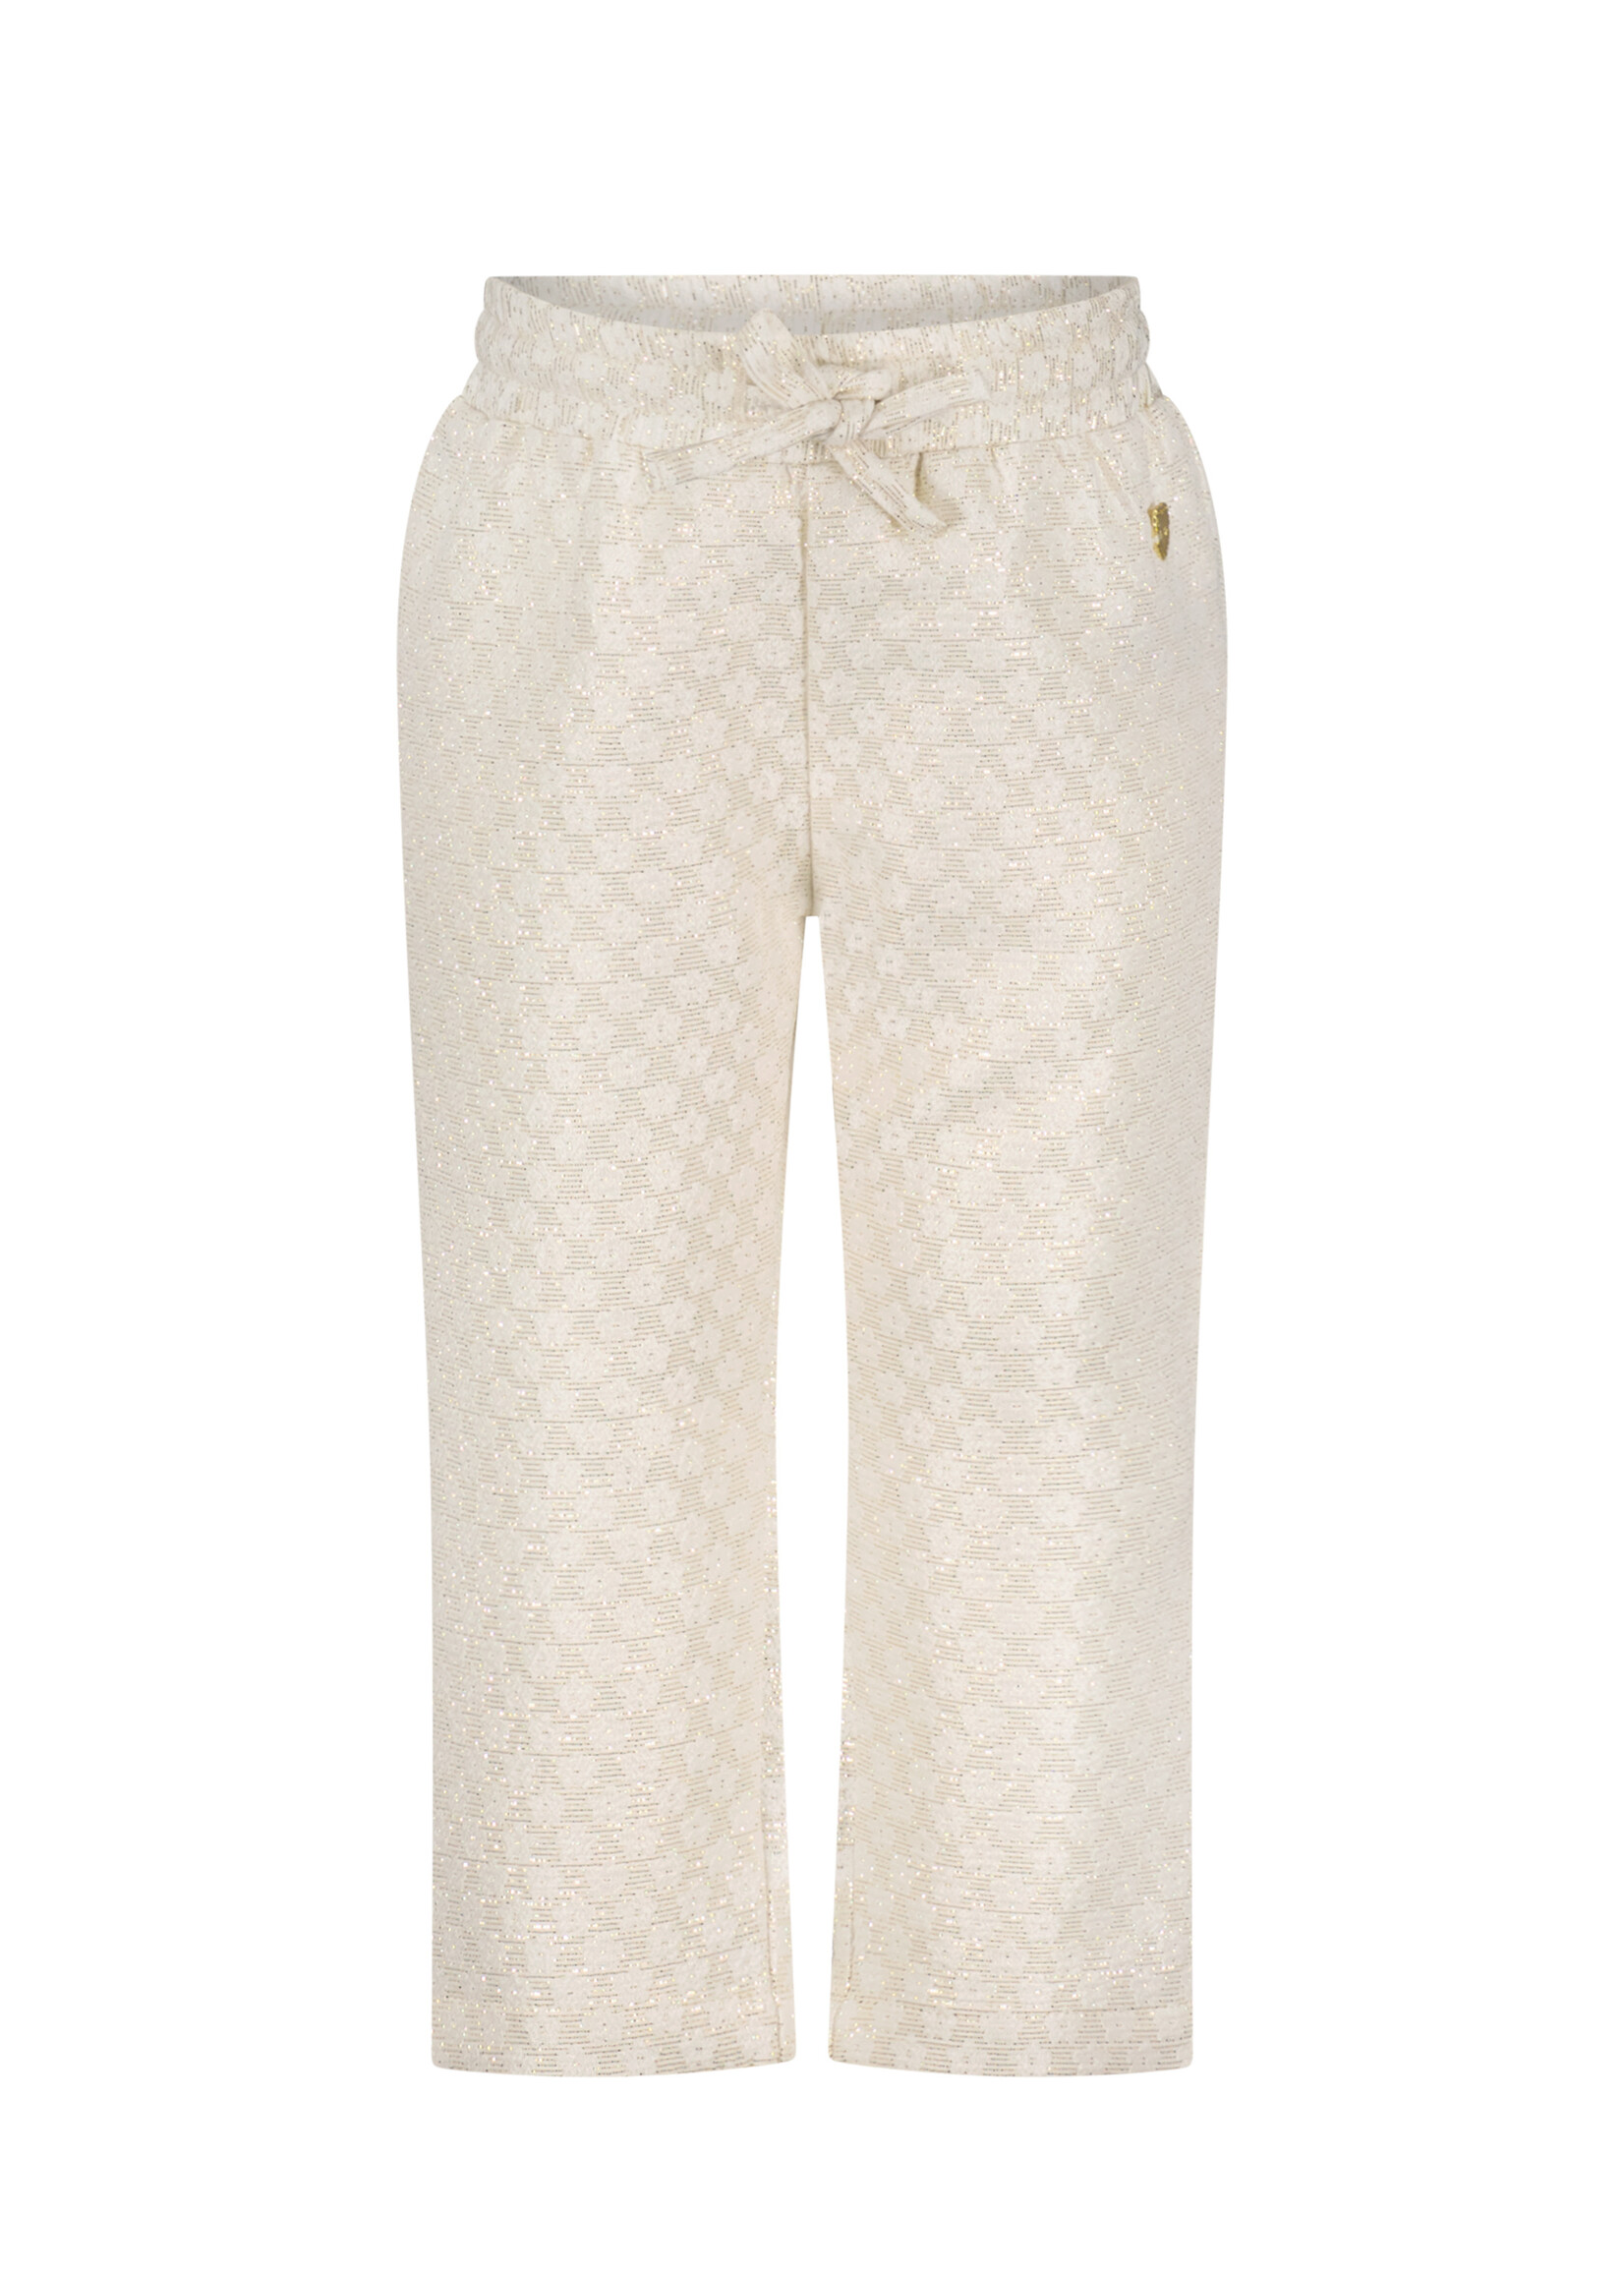 Le Chic Girls Baby C312-7603 DELHY flowers & lurex trousers Champagne